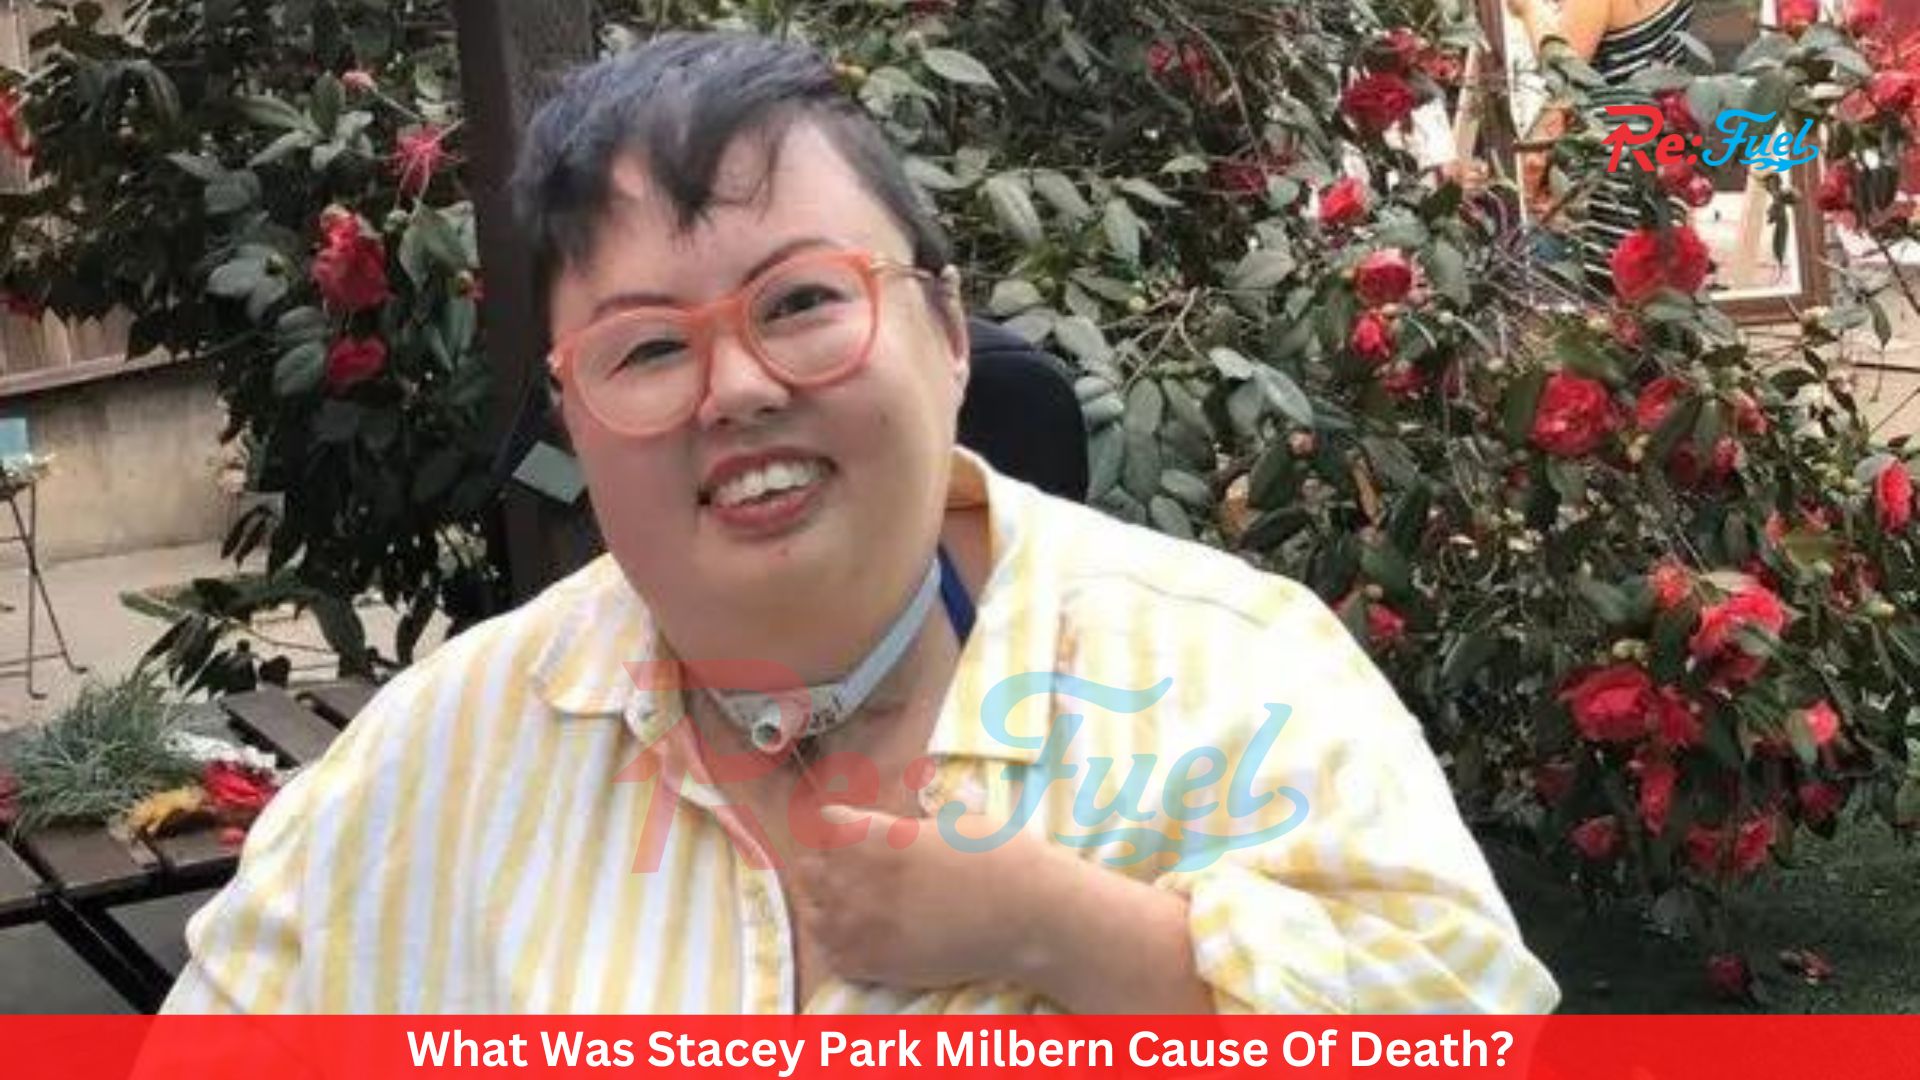 What Was Stacey Park Milbern Cause Of Death?